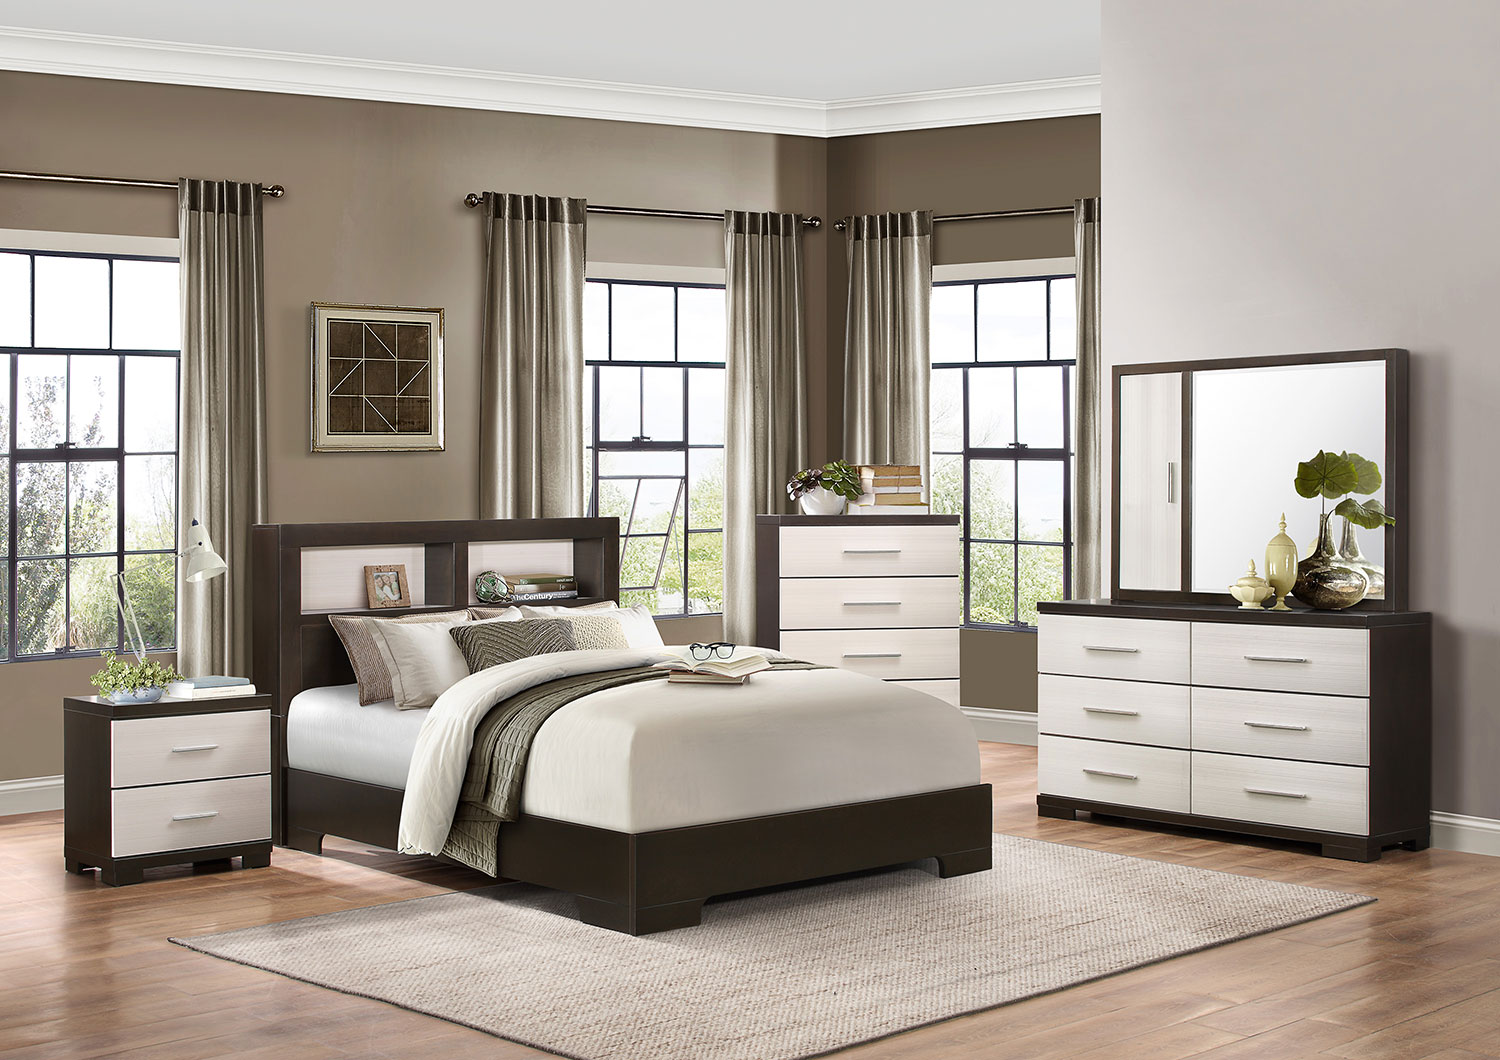 Homelegance Pell Low Profile Storage Bookcase Bedroom Set - Two-tone Espresso/White